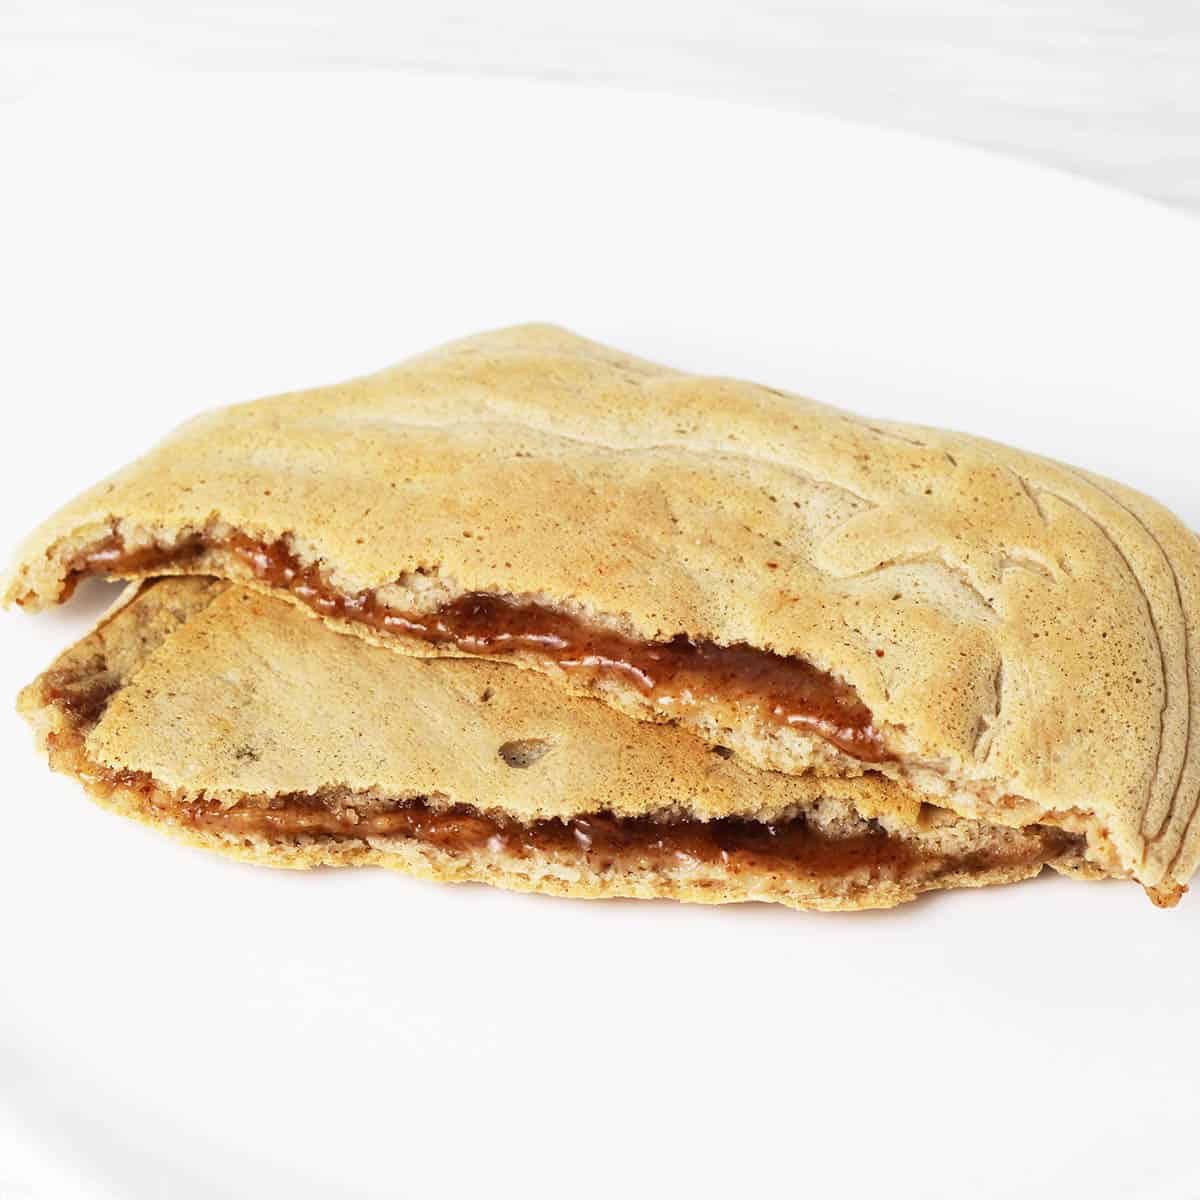 two halves of pancake stuffed with maple almond butter on a white plate